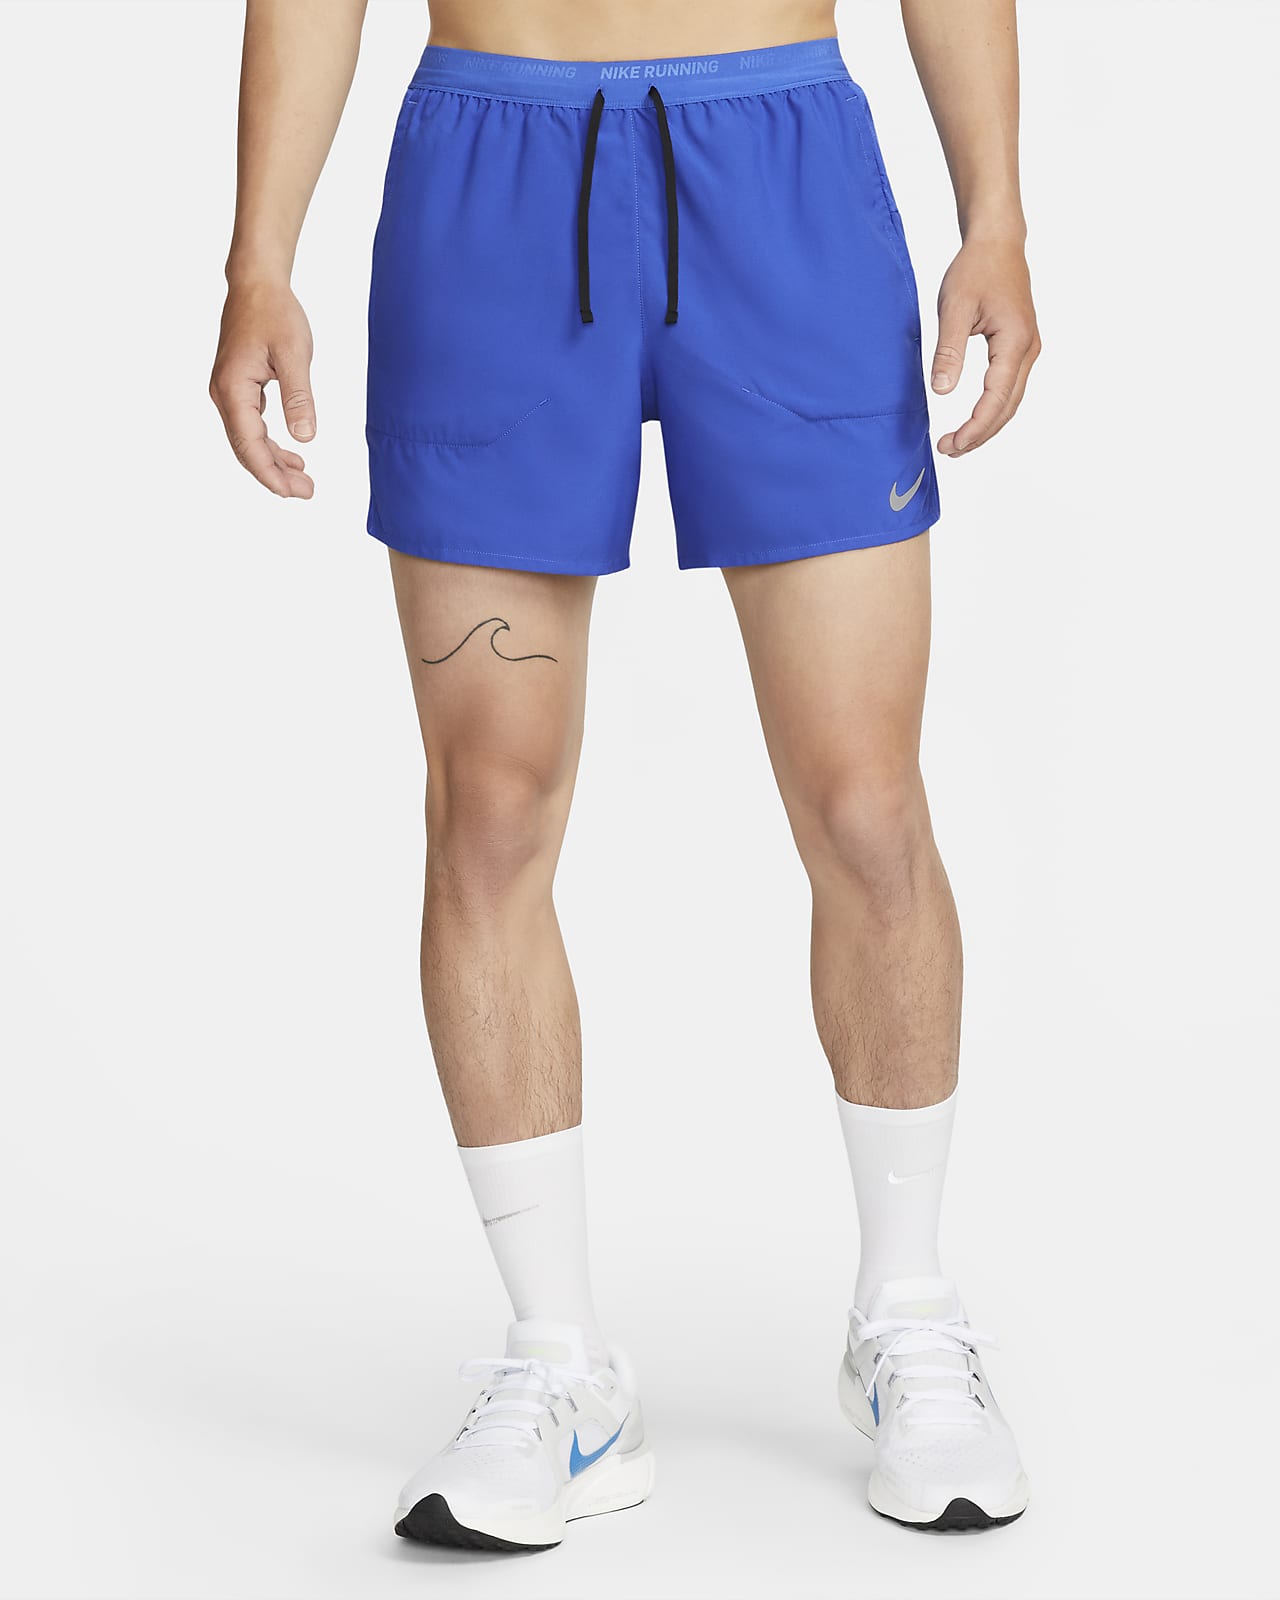 apparatus disgusting Tick Nike Dri-FIT Stride Men's 13cm (approx.) Brief-Lined Running Shorts. Nike ID